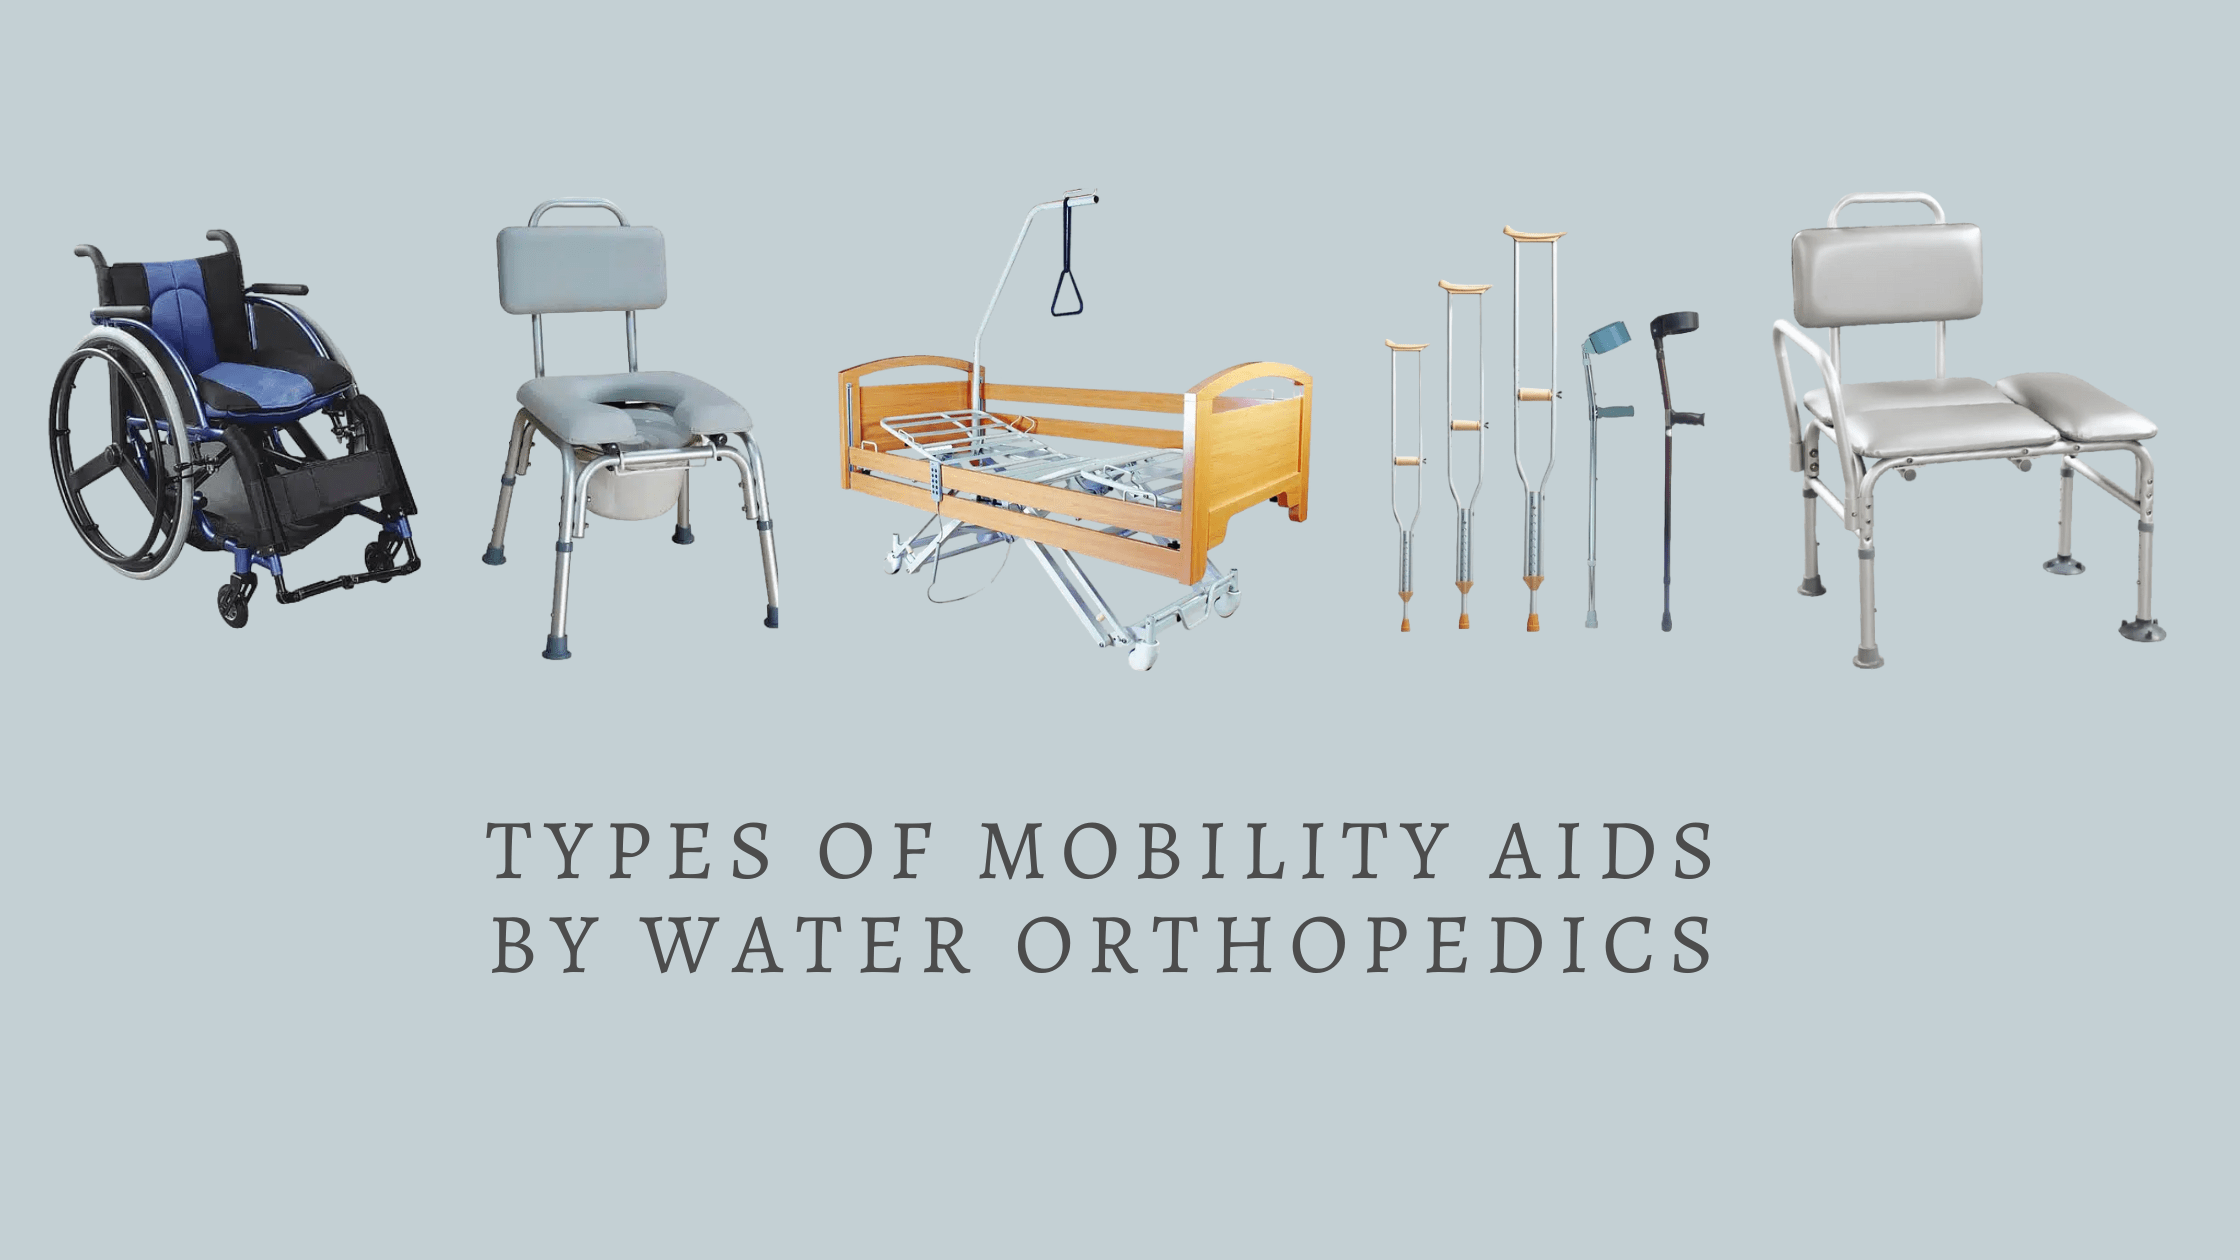 Types of mobility aids by water orthopedics